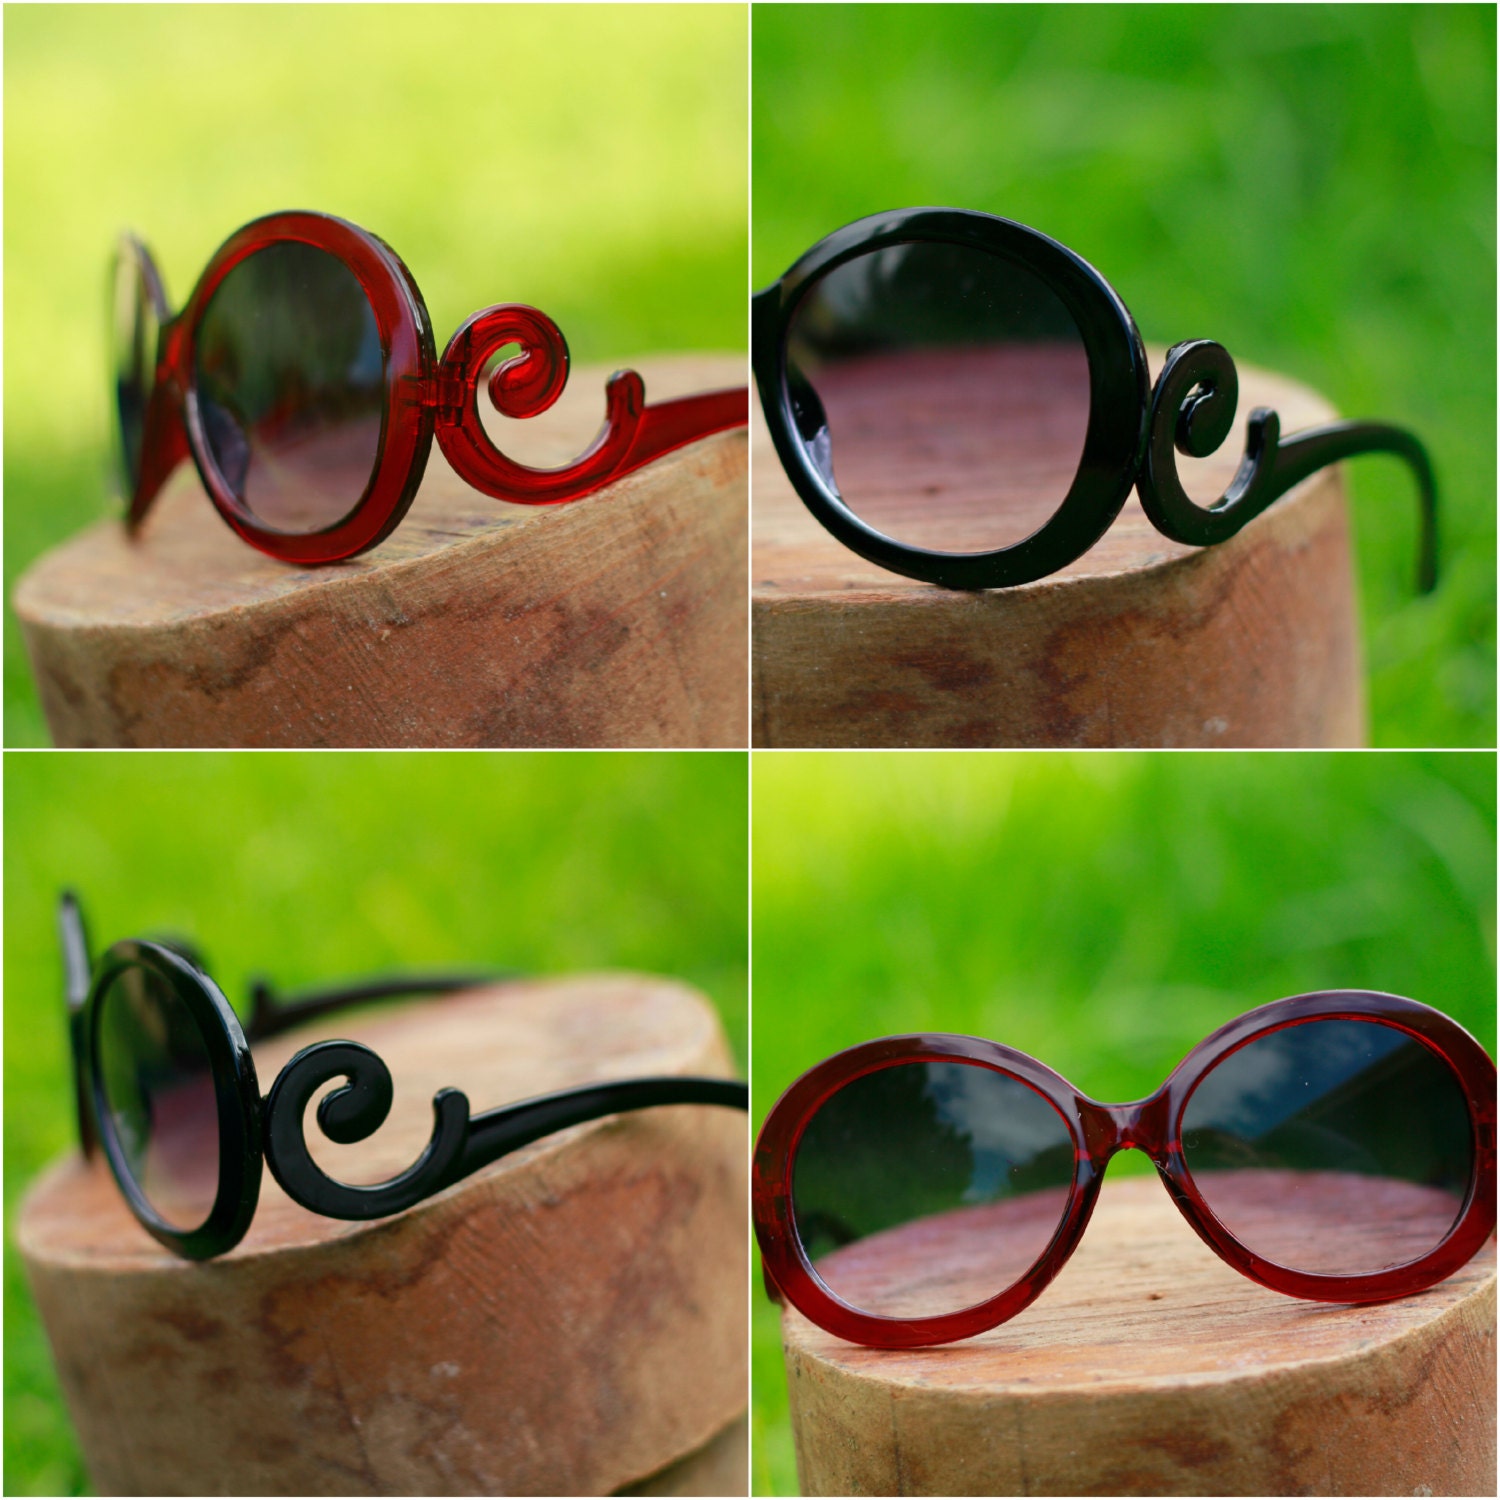 High Fashion Sunglasses Detailed Intricate Different